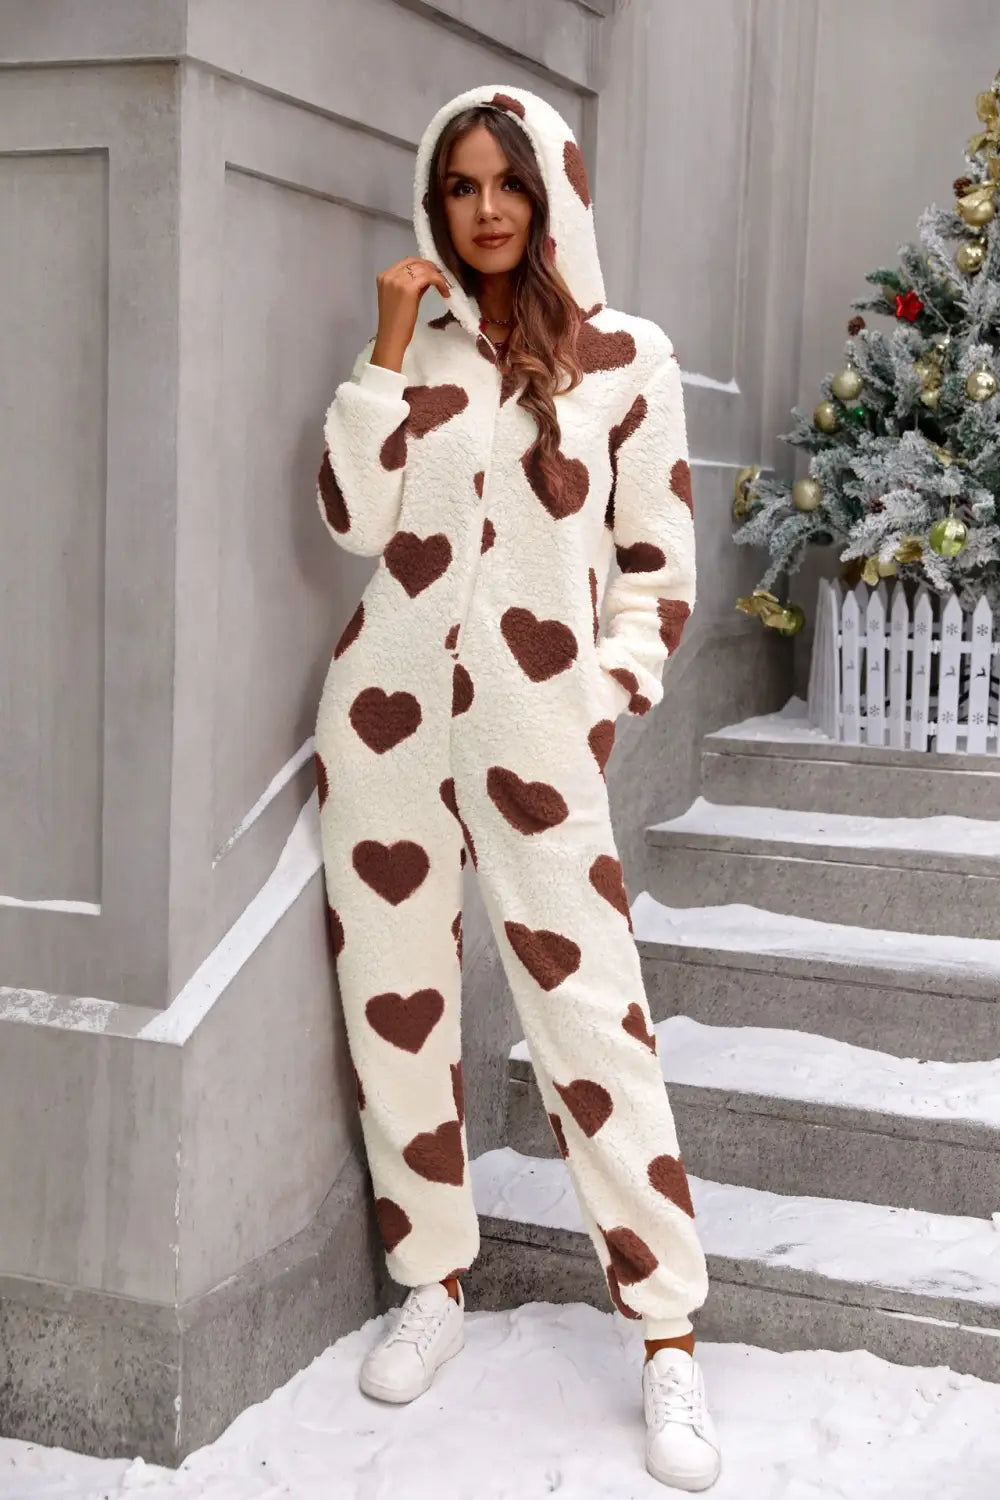 Loving Heart Plush Jumpsuit - Cozy Chic For Fall/winter